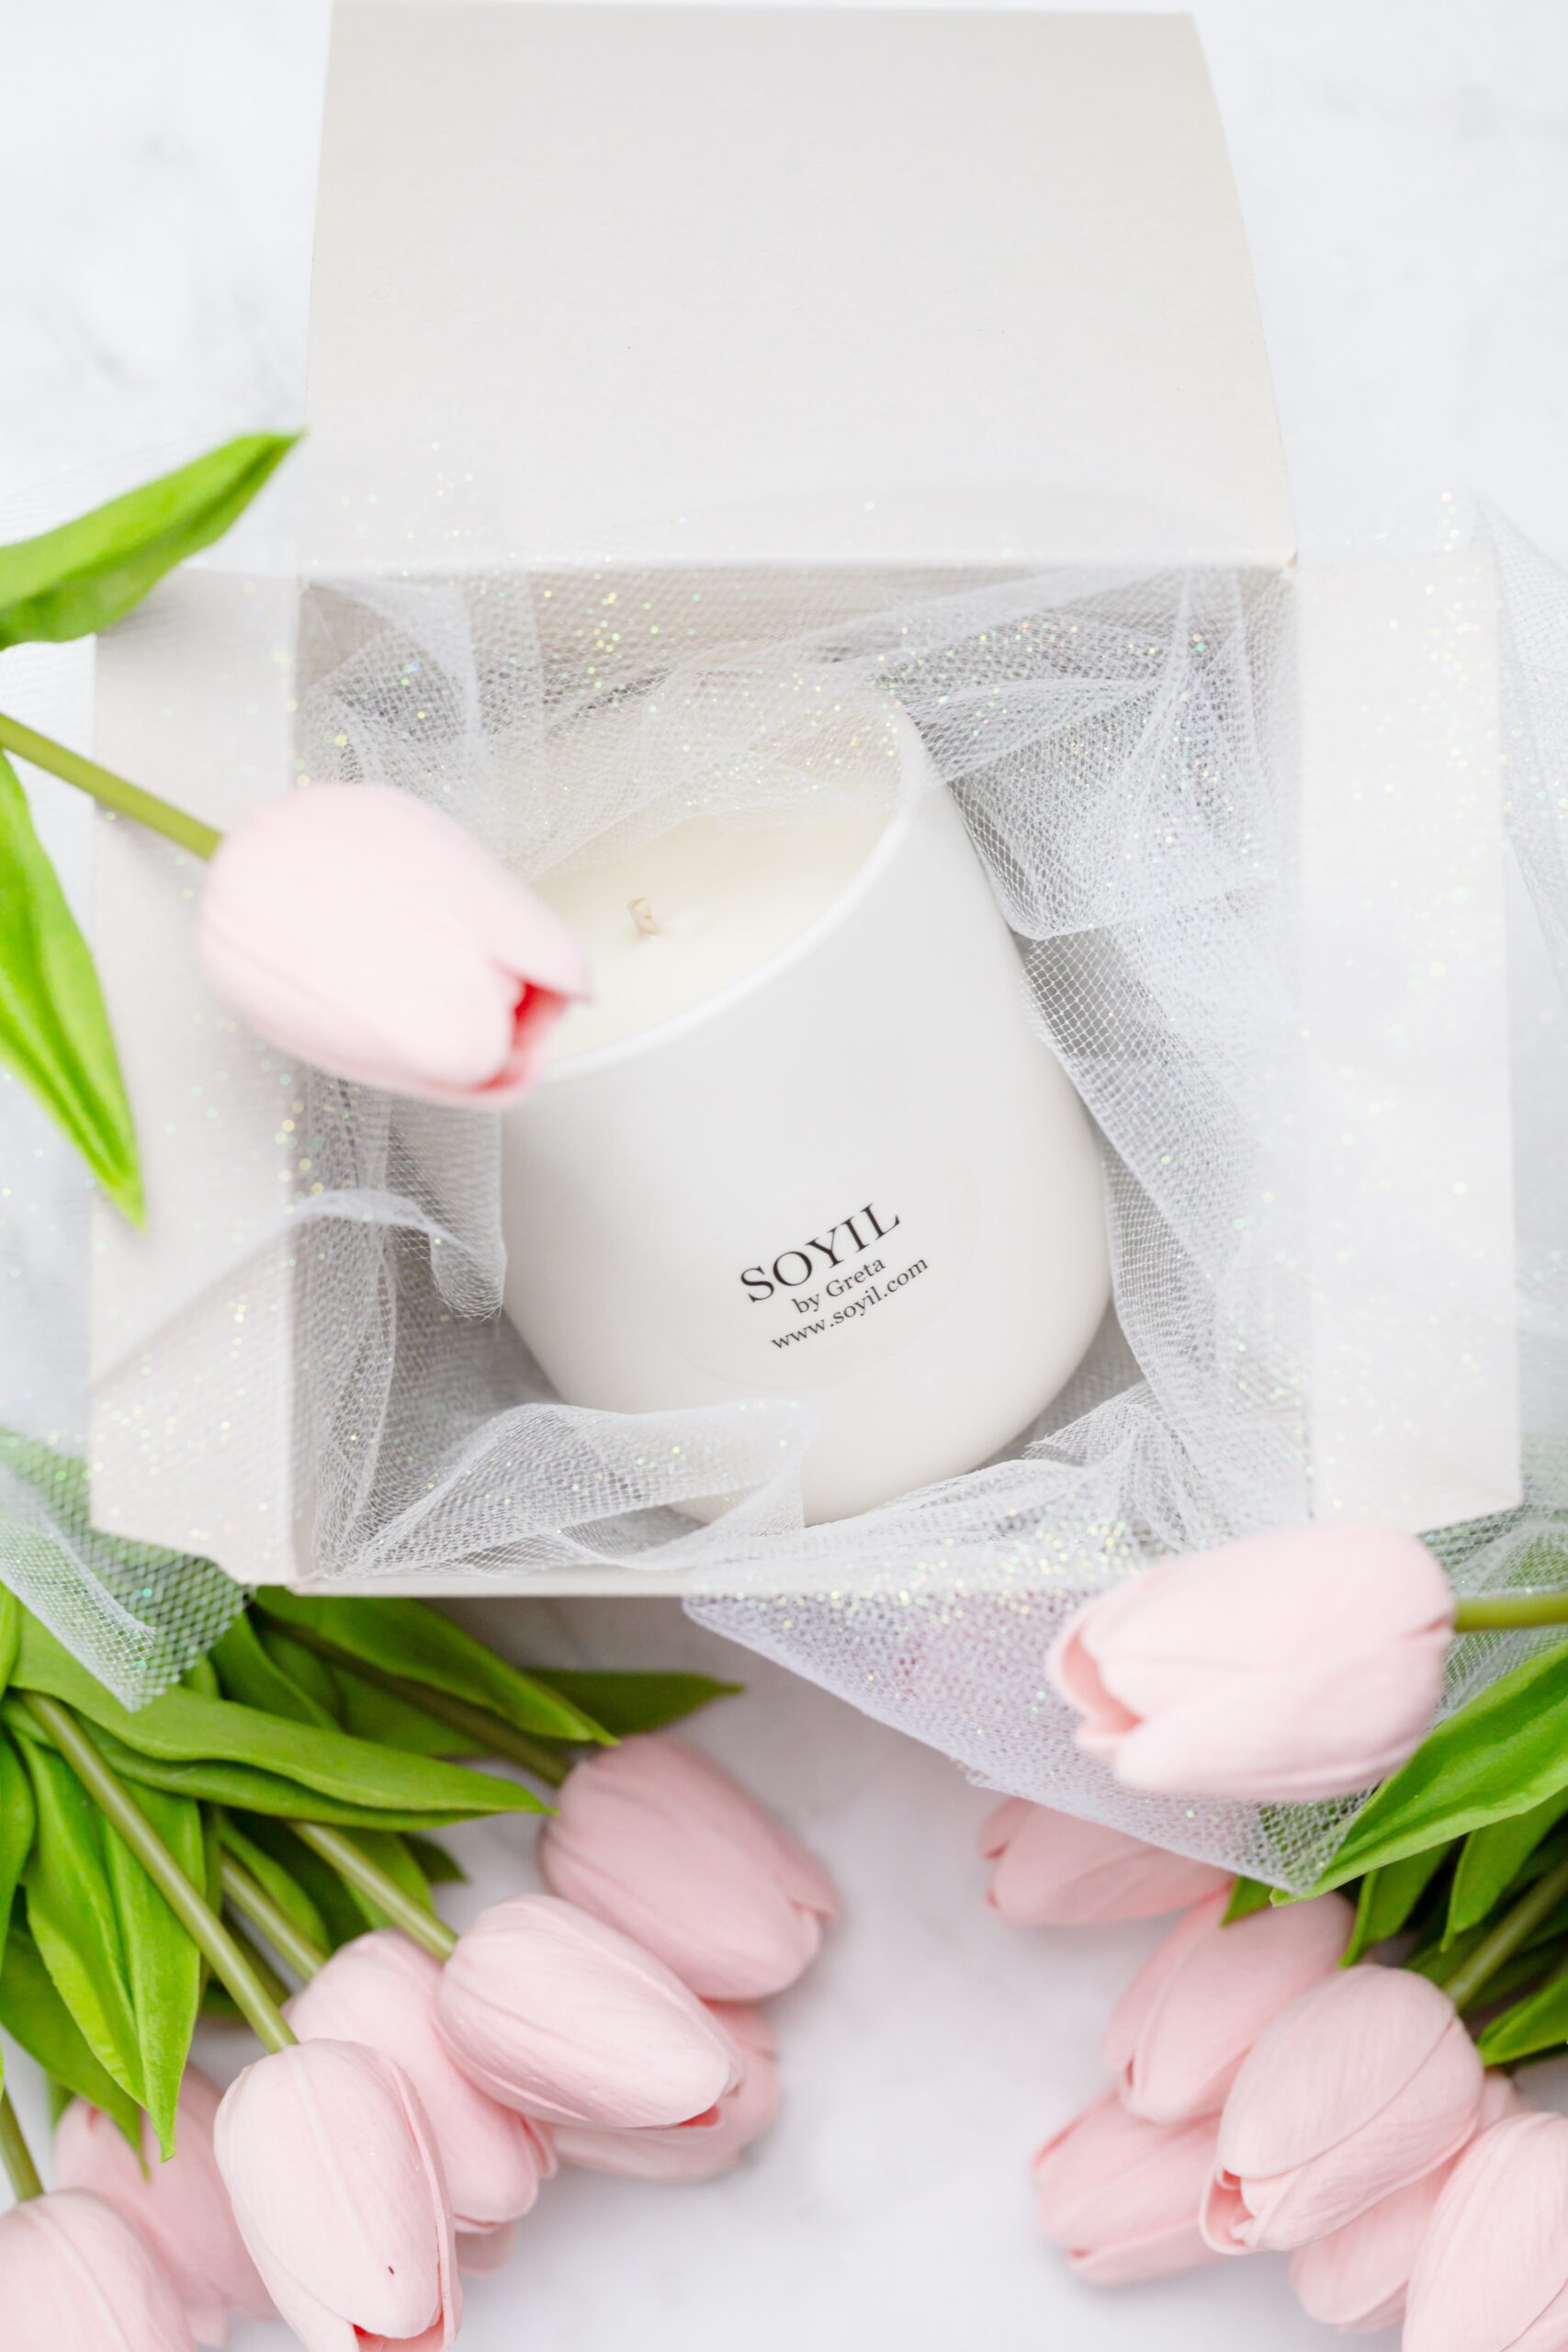 A photo of a Soyil candle in a box with tulle and flowers surrounding it.